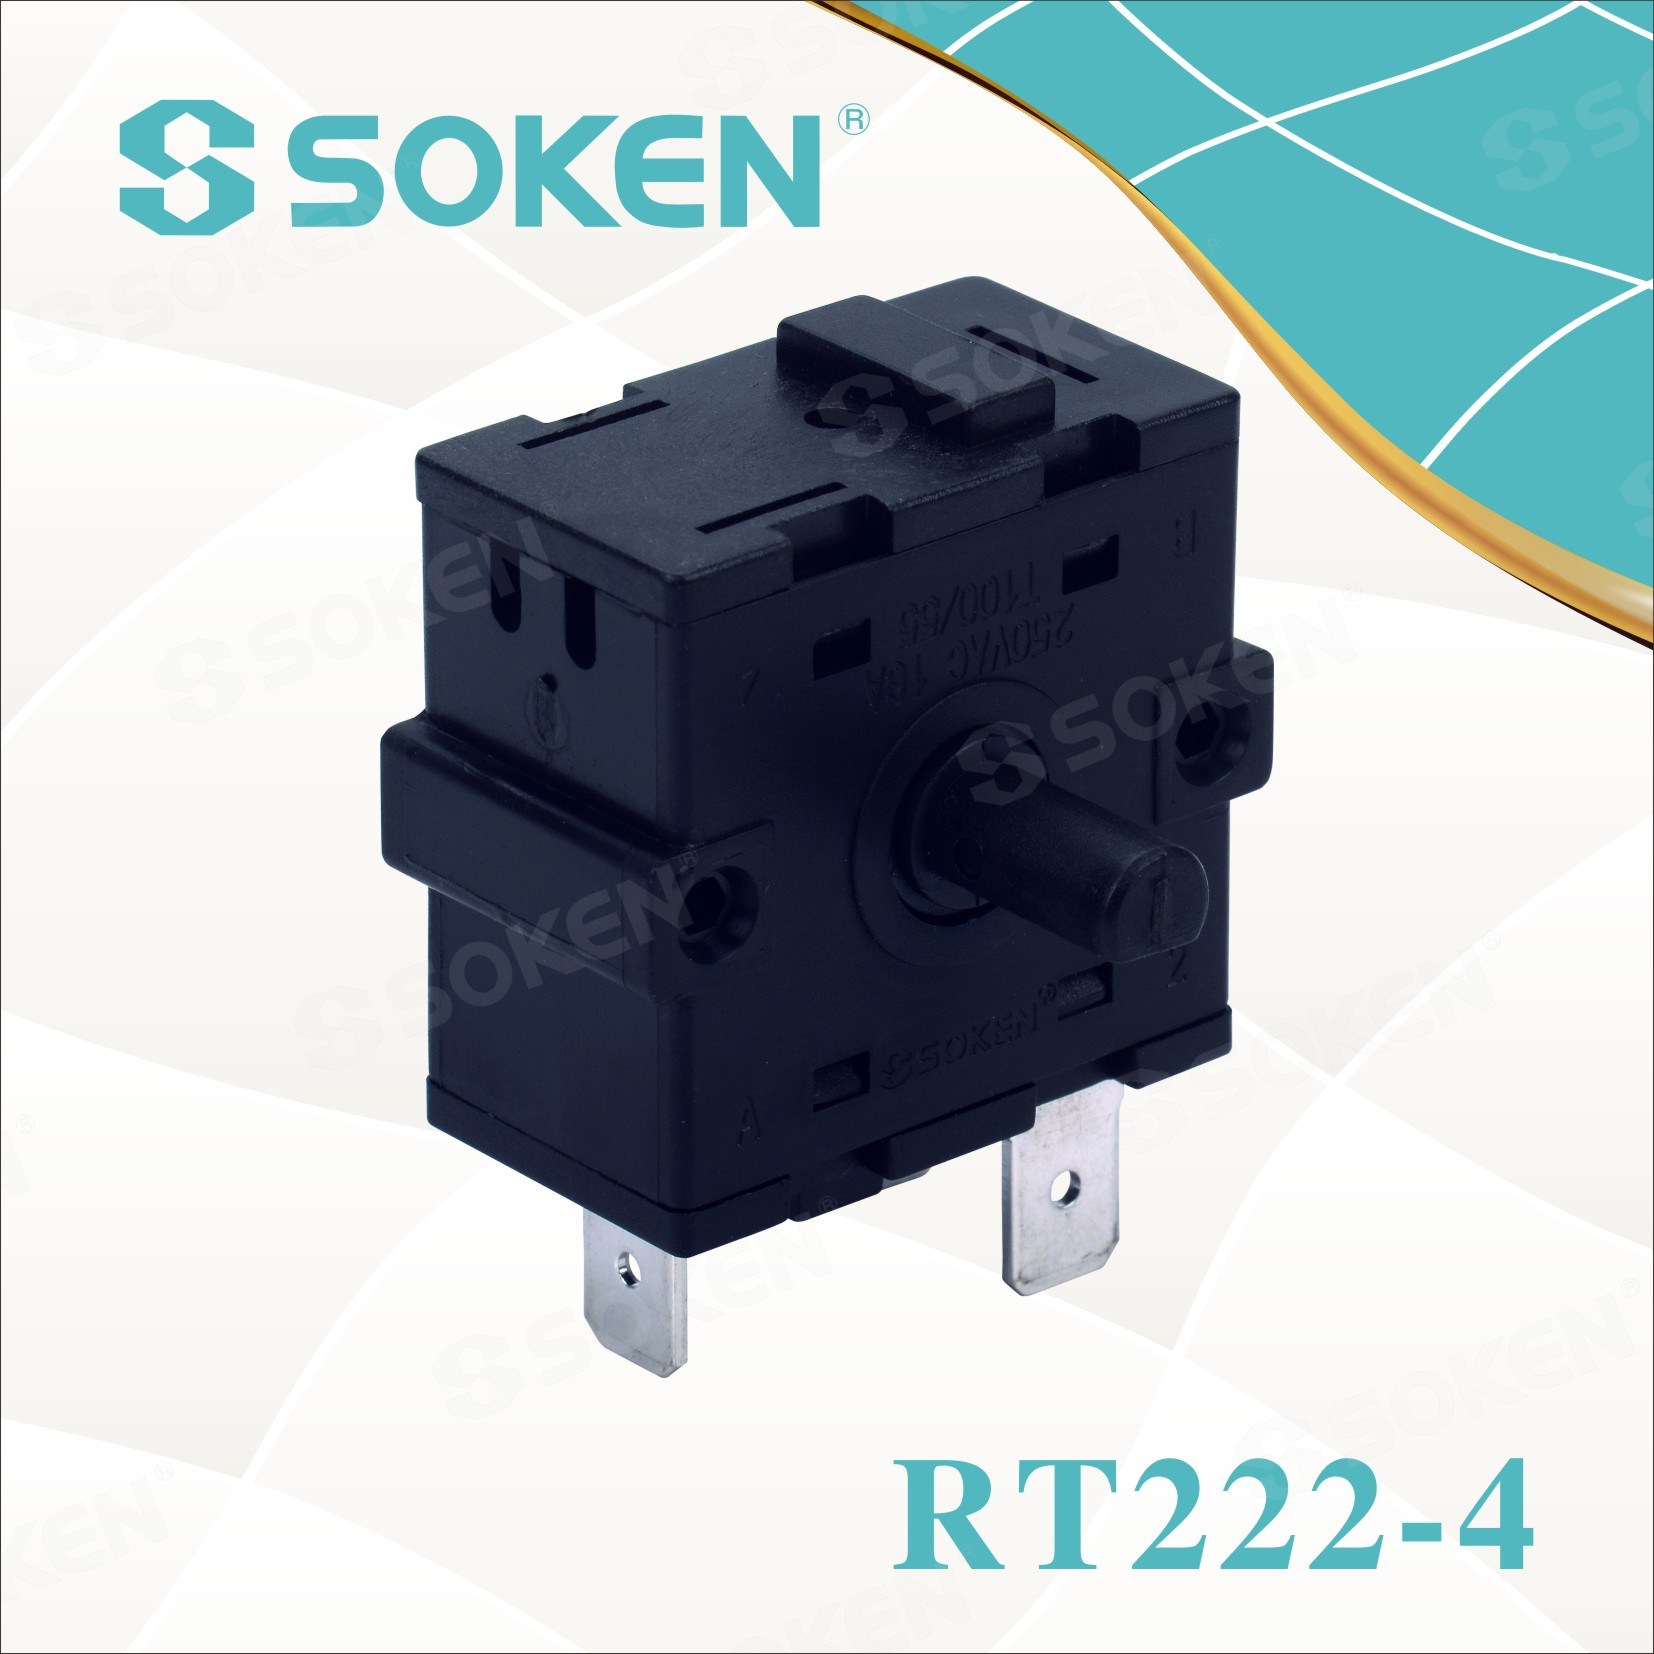 Soken 3 Position Rotary Switch